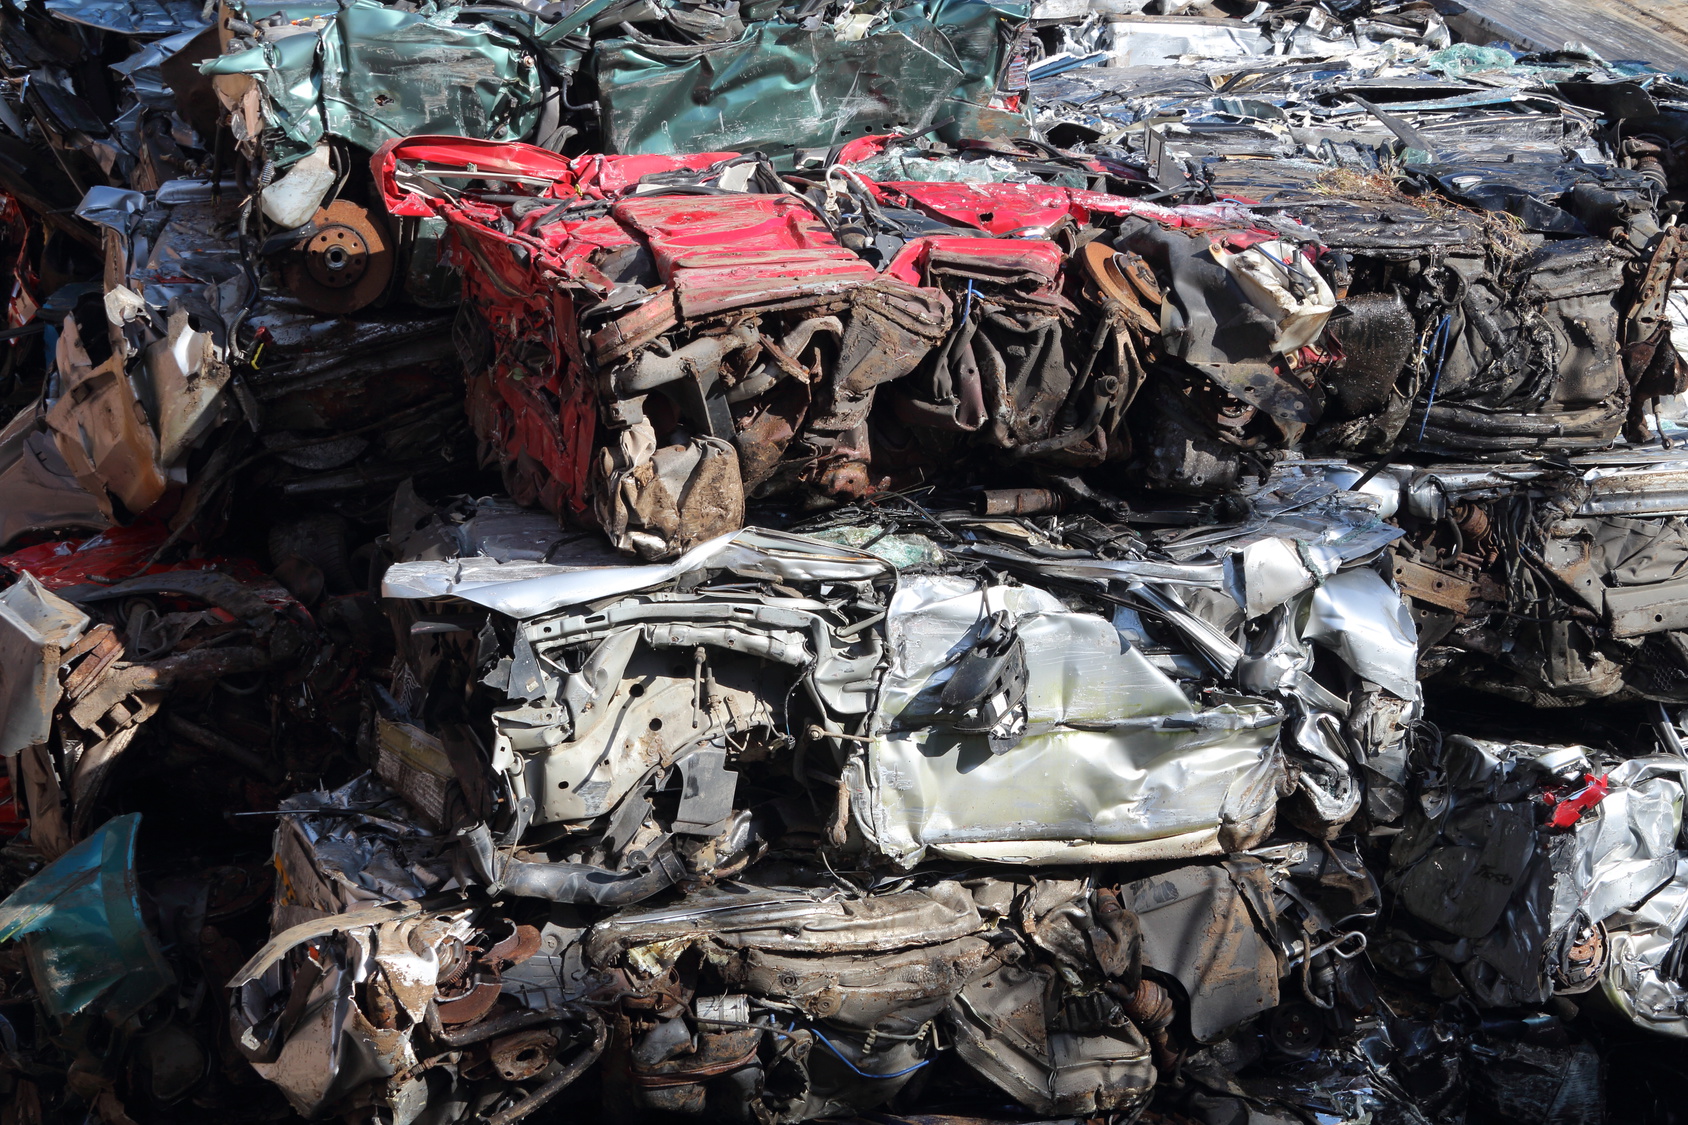 End of the road for these cars - scarp & recycle